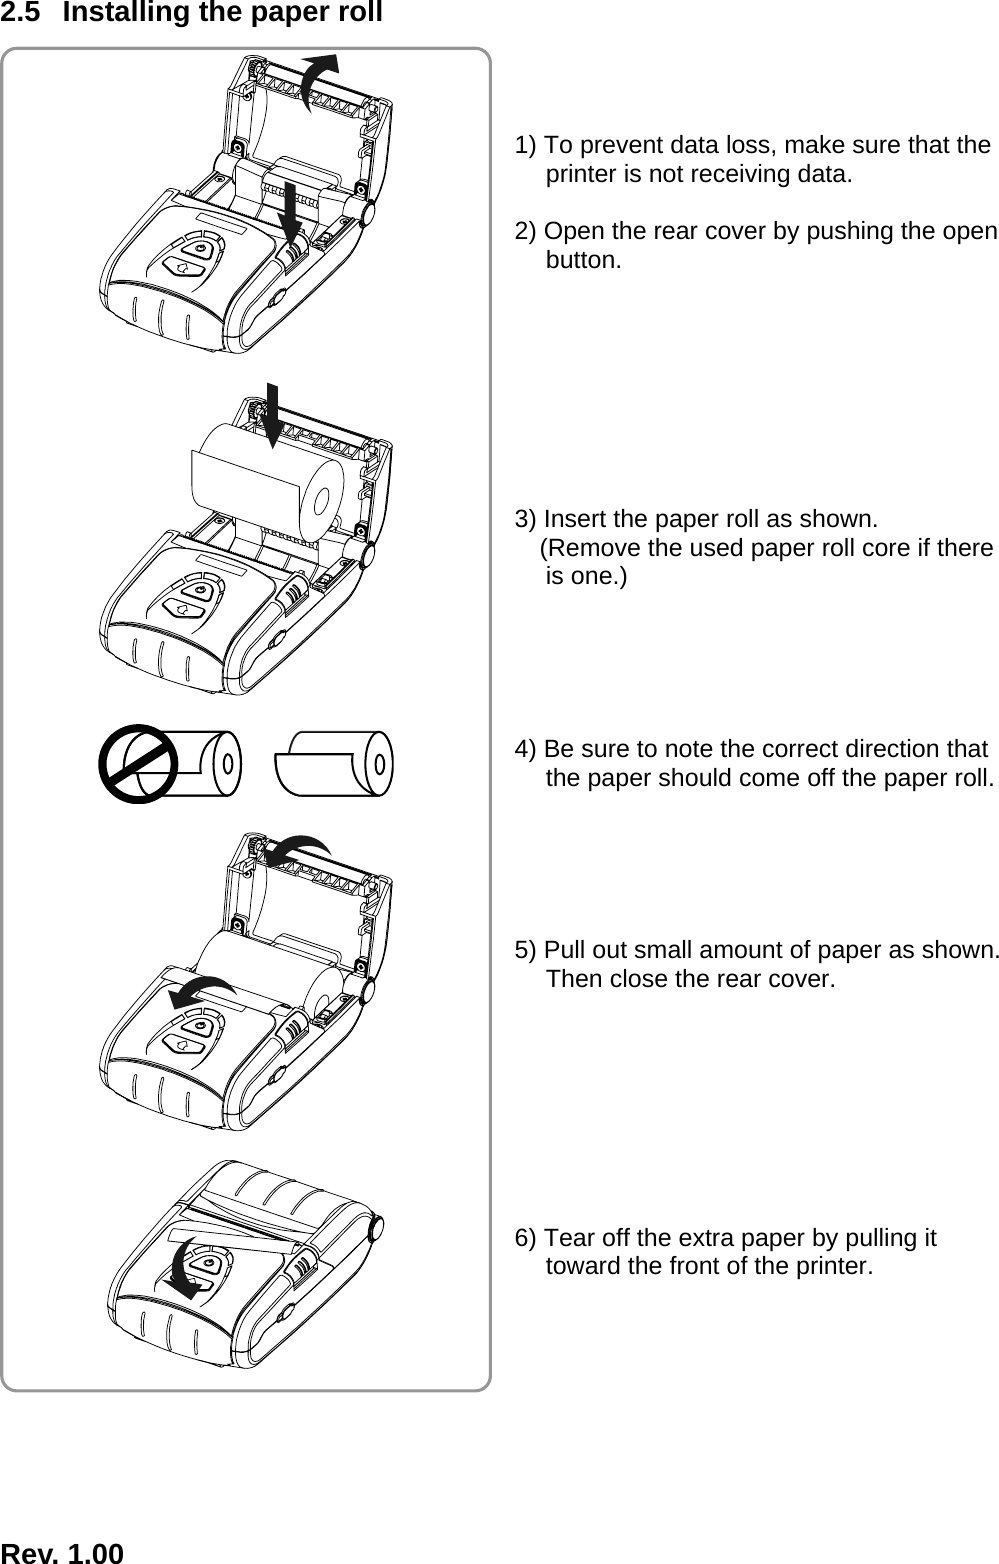  Rev. 1.00  2.5  Installing the paper roll    1) To prevent data loss, make sure that the printer is not receiving data.  2) Open the rear cover by pushing the open button.         3) Insert the paper roll as shown. (Remove the used paper roll core if there is one.)      4) Be sure to note the correct direction that the paper should come off the paper roll.      5) Pull out small amount of paper as shown. Then close the rear cover.         6) Tear off the extra paper by pulling it toward the front of the printer.          